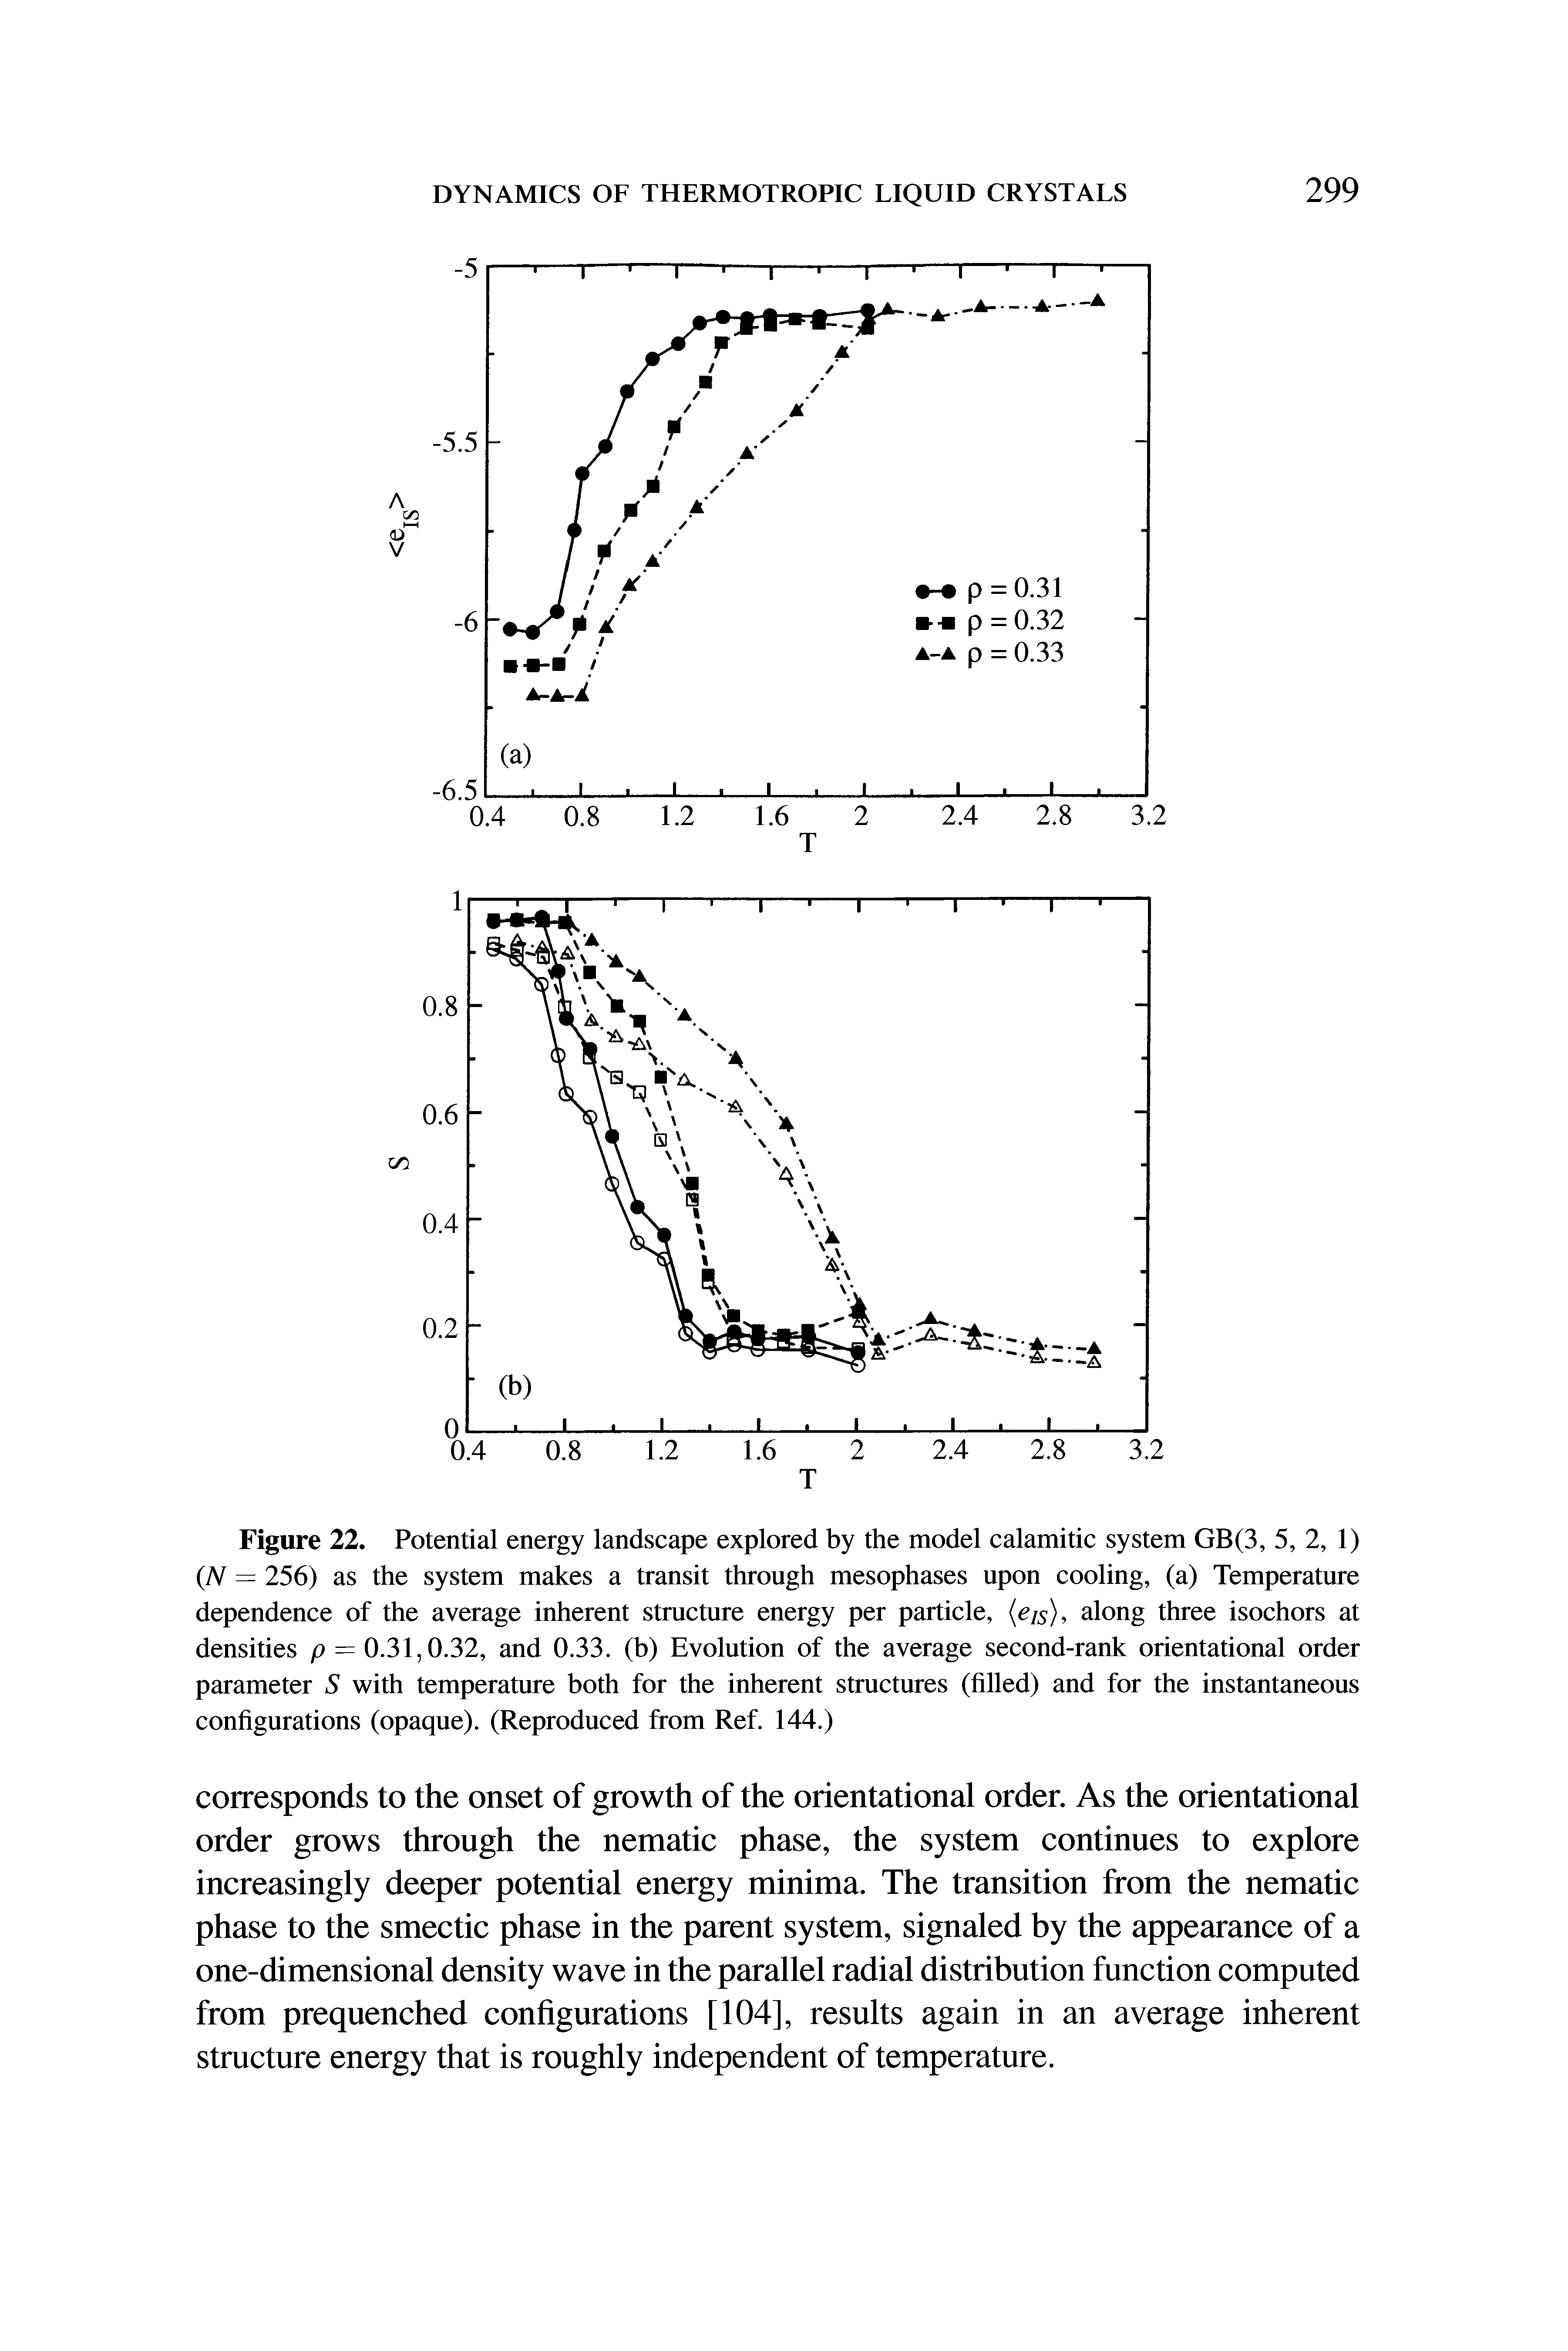 Figure 22. Potential energy landscape explored by the model calamitic system GB(3, 5, 2, 1) (N = 256) as the system makes a transit through mesophases upon cooling, (a) Temperature dependence of the average inherent structure energy per particle, (< /s), along three isochors at densities p = 0.31,0.32, and 0.33. (b) Evolution of the average second-rank orientational order parameter S with temperature both for the inherent structures (filled) and for the instantaneous configurations (opaque). (Reproduced from Ref. 144.)...